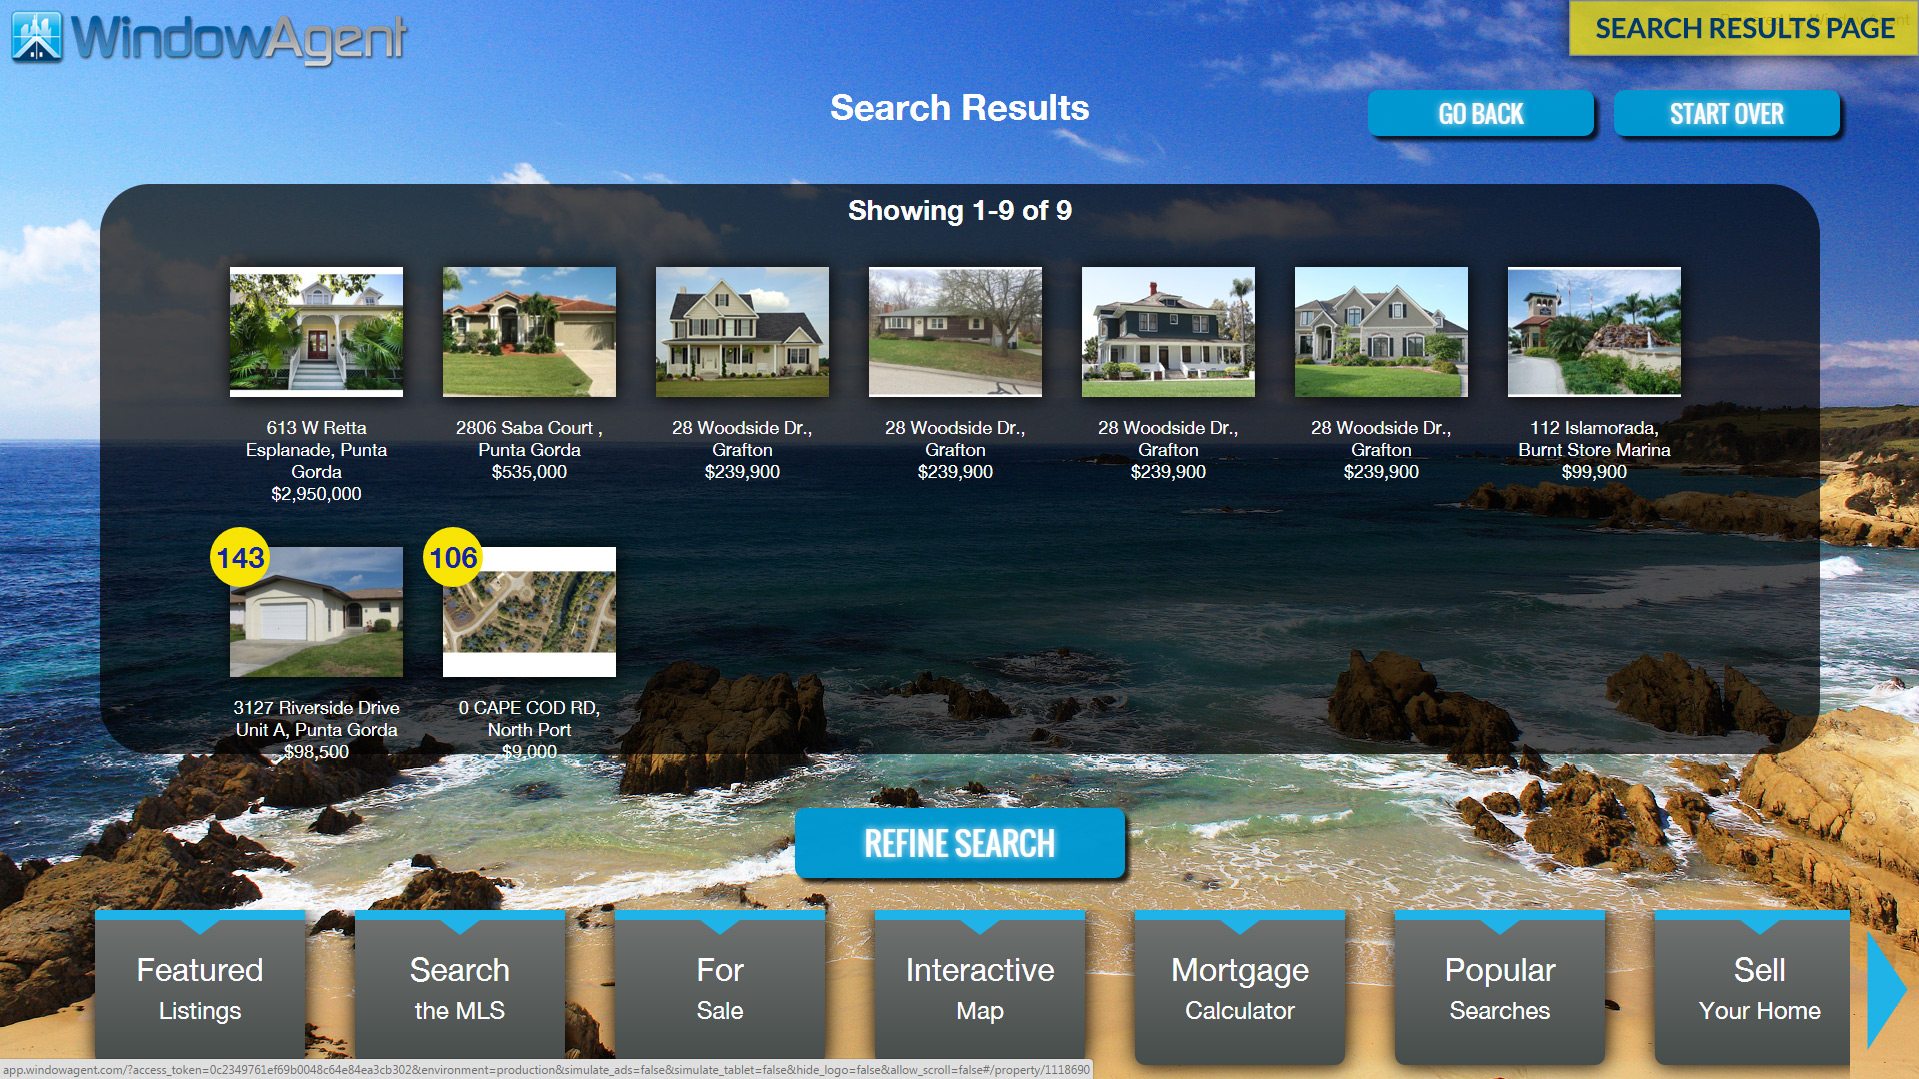 Windowagent real estate marketing software property search results page